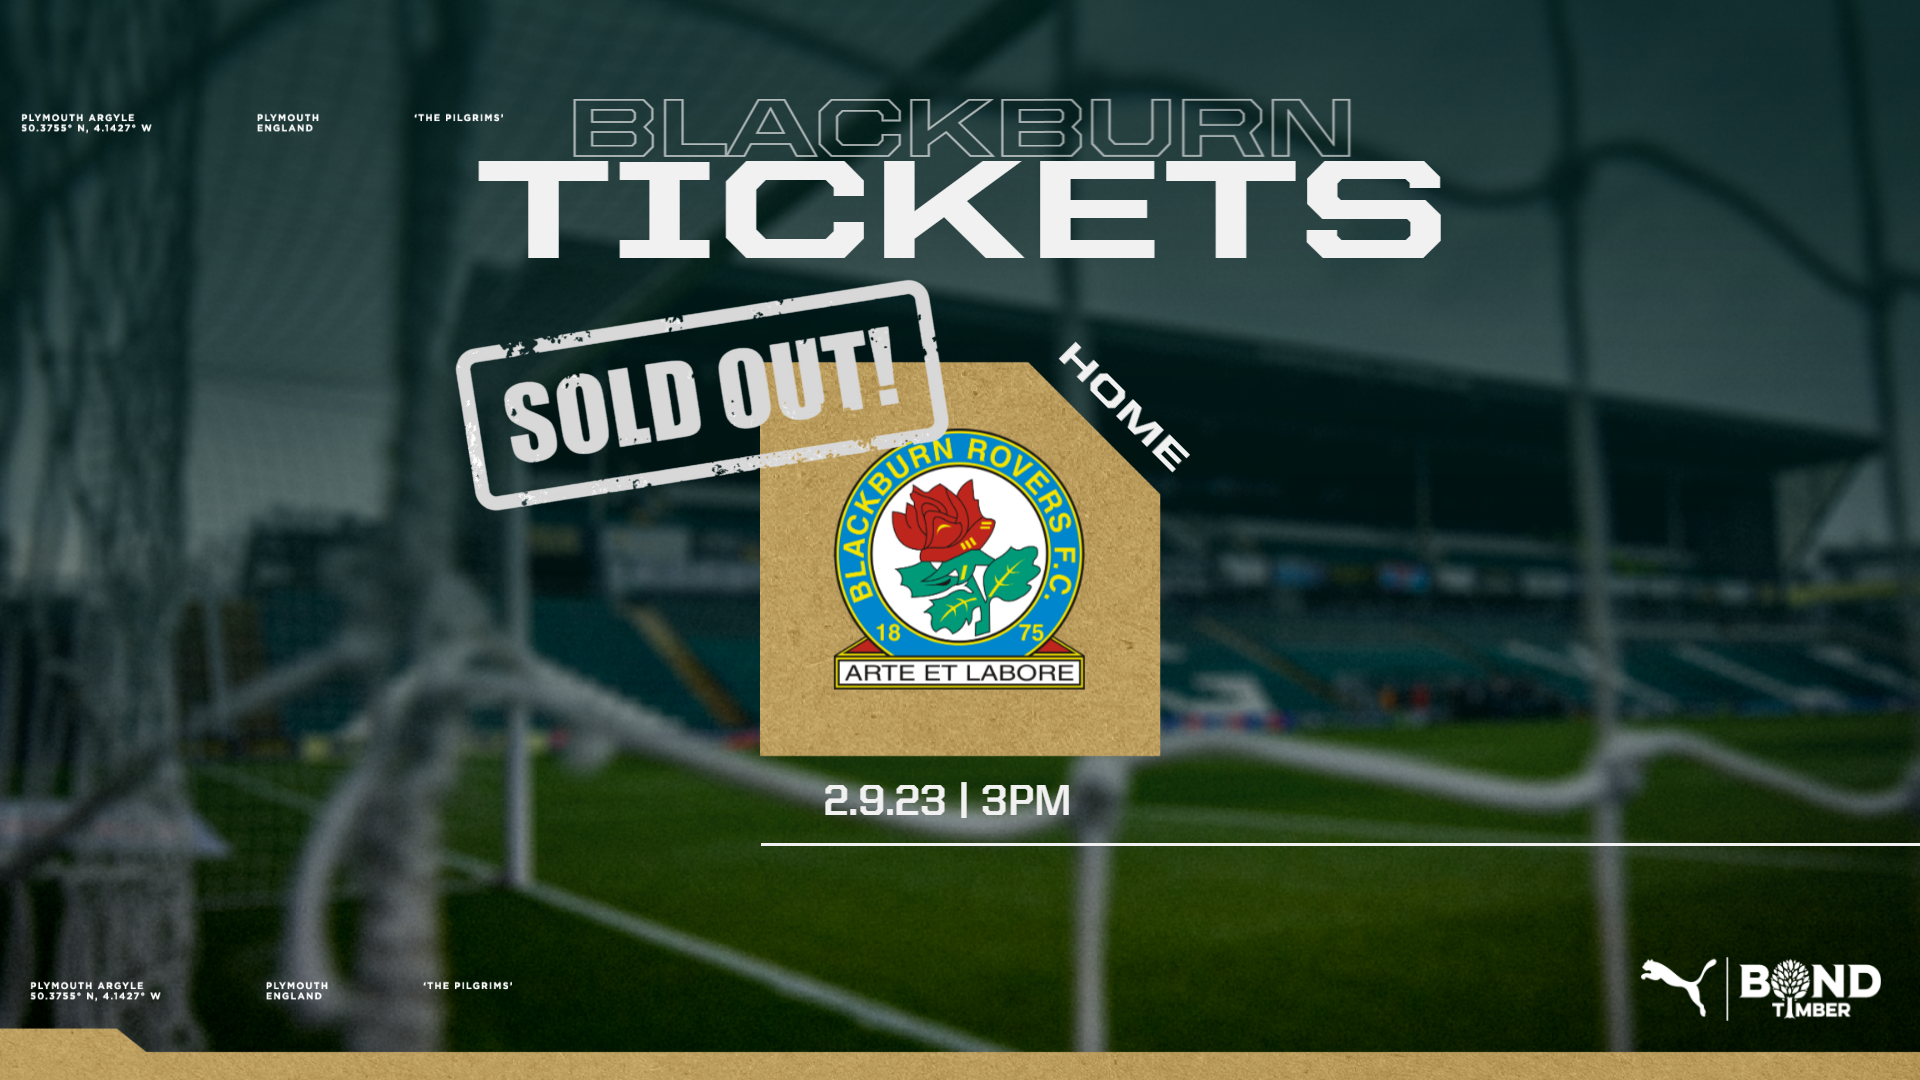 Blackburn Tickets sold out